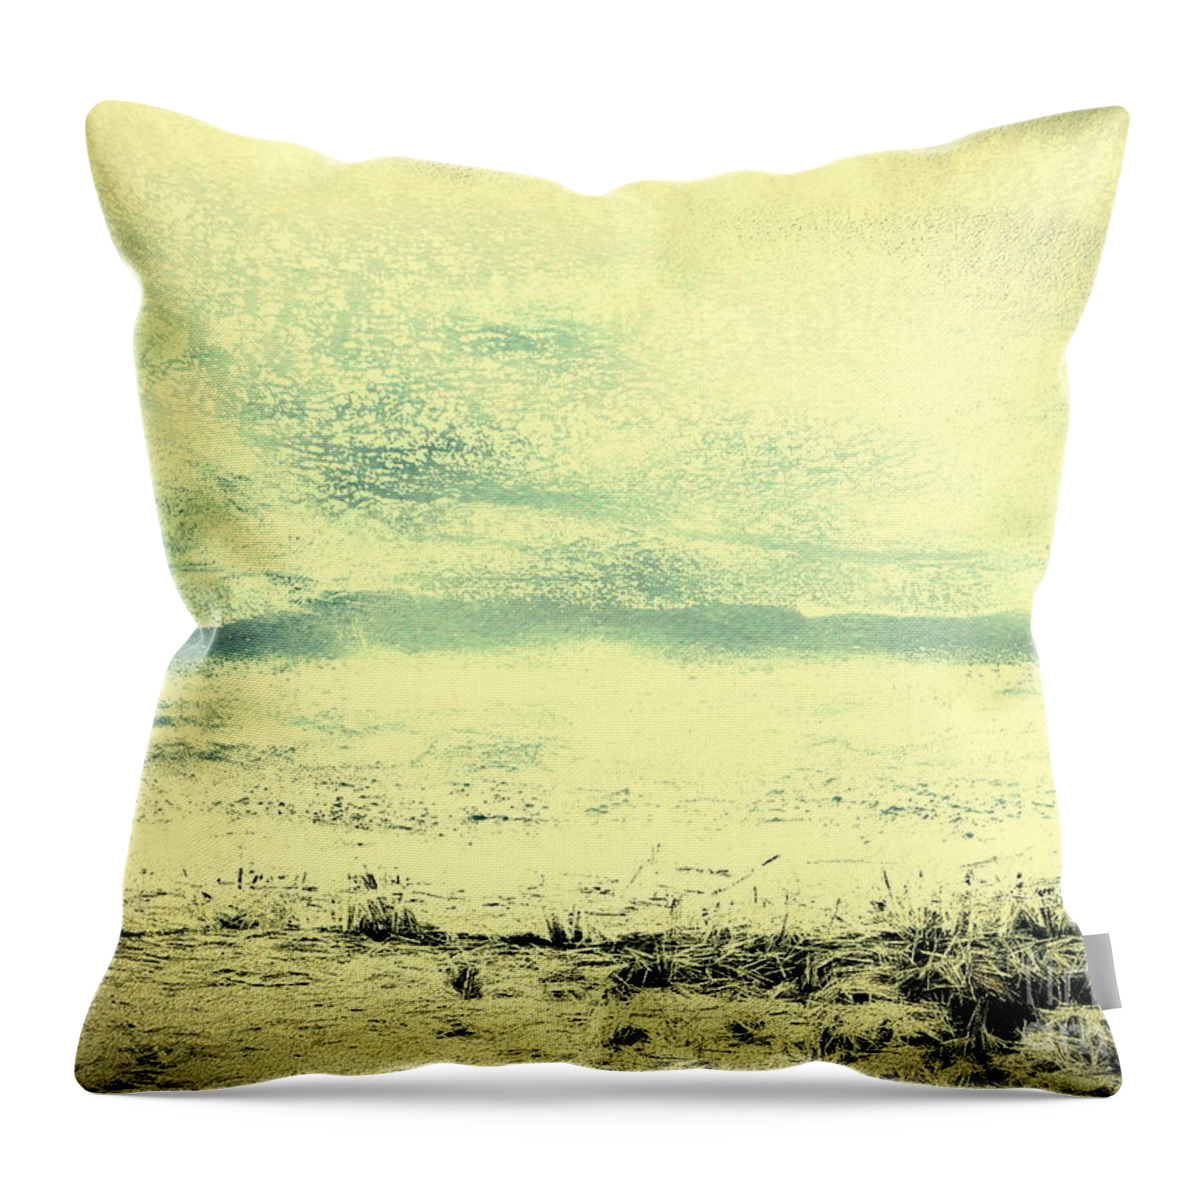 Digital Altered Photo Throw Pillow featuring the digital art Hallucination on a Beach by Tim Richards